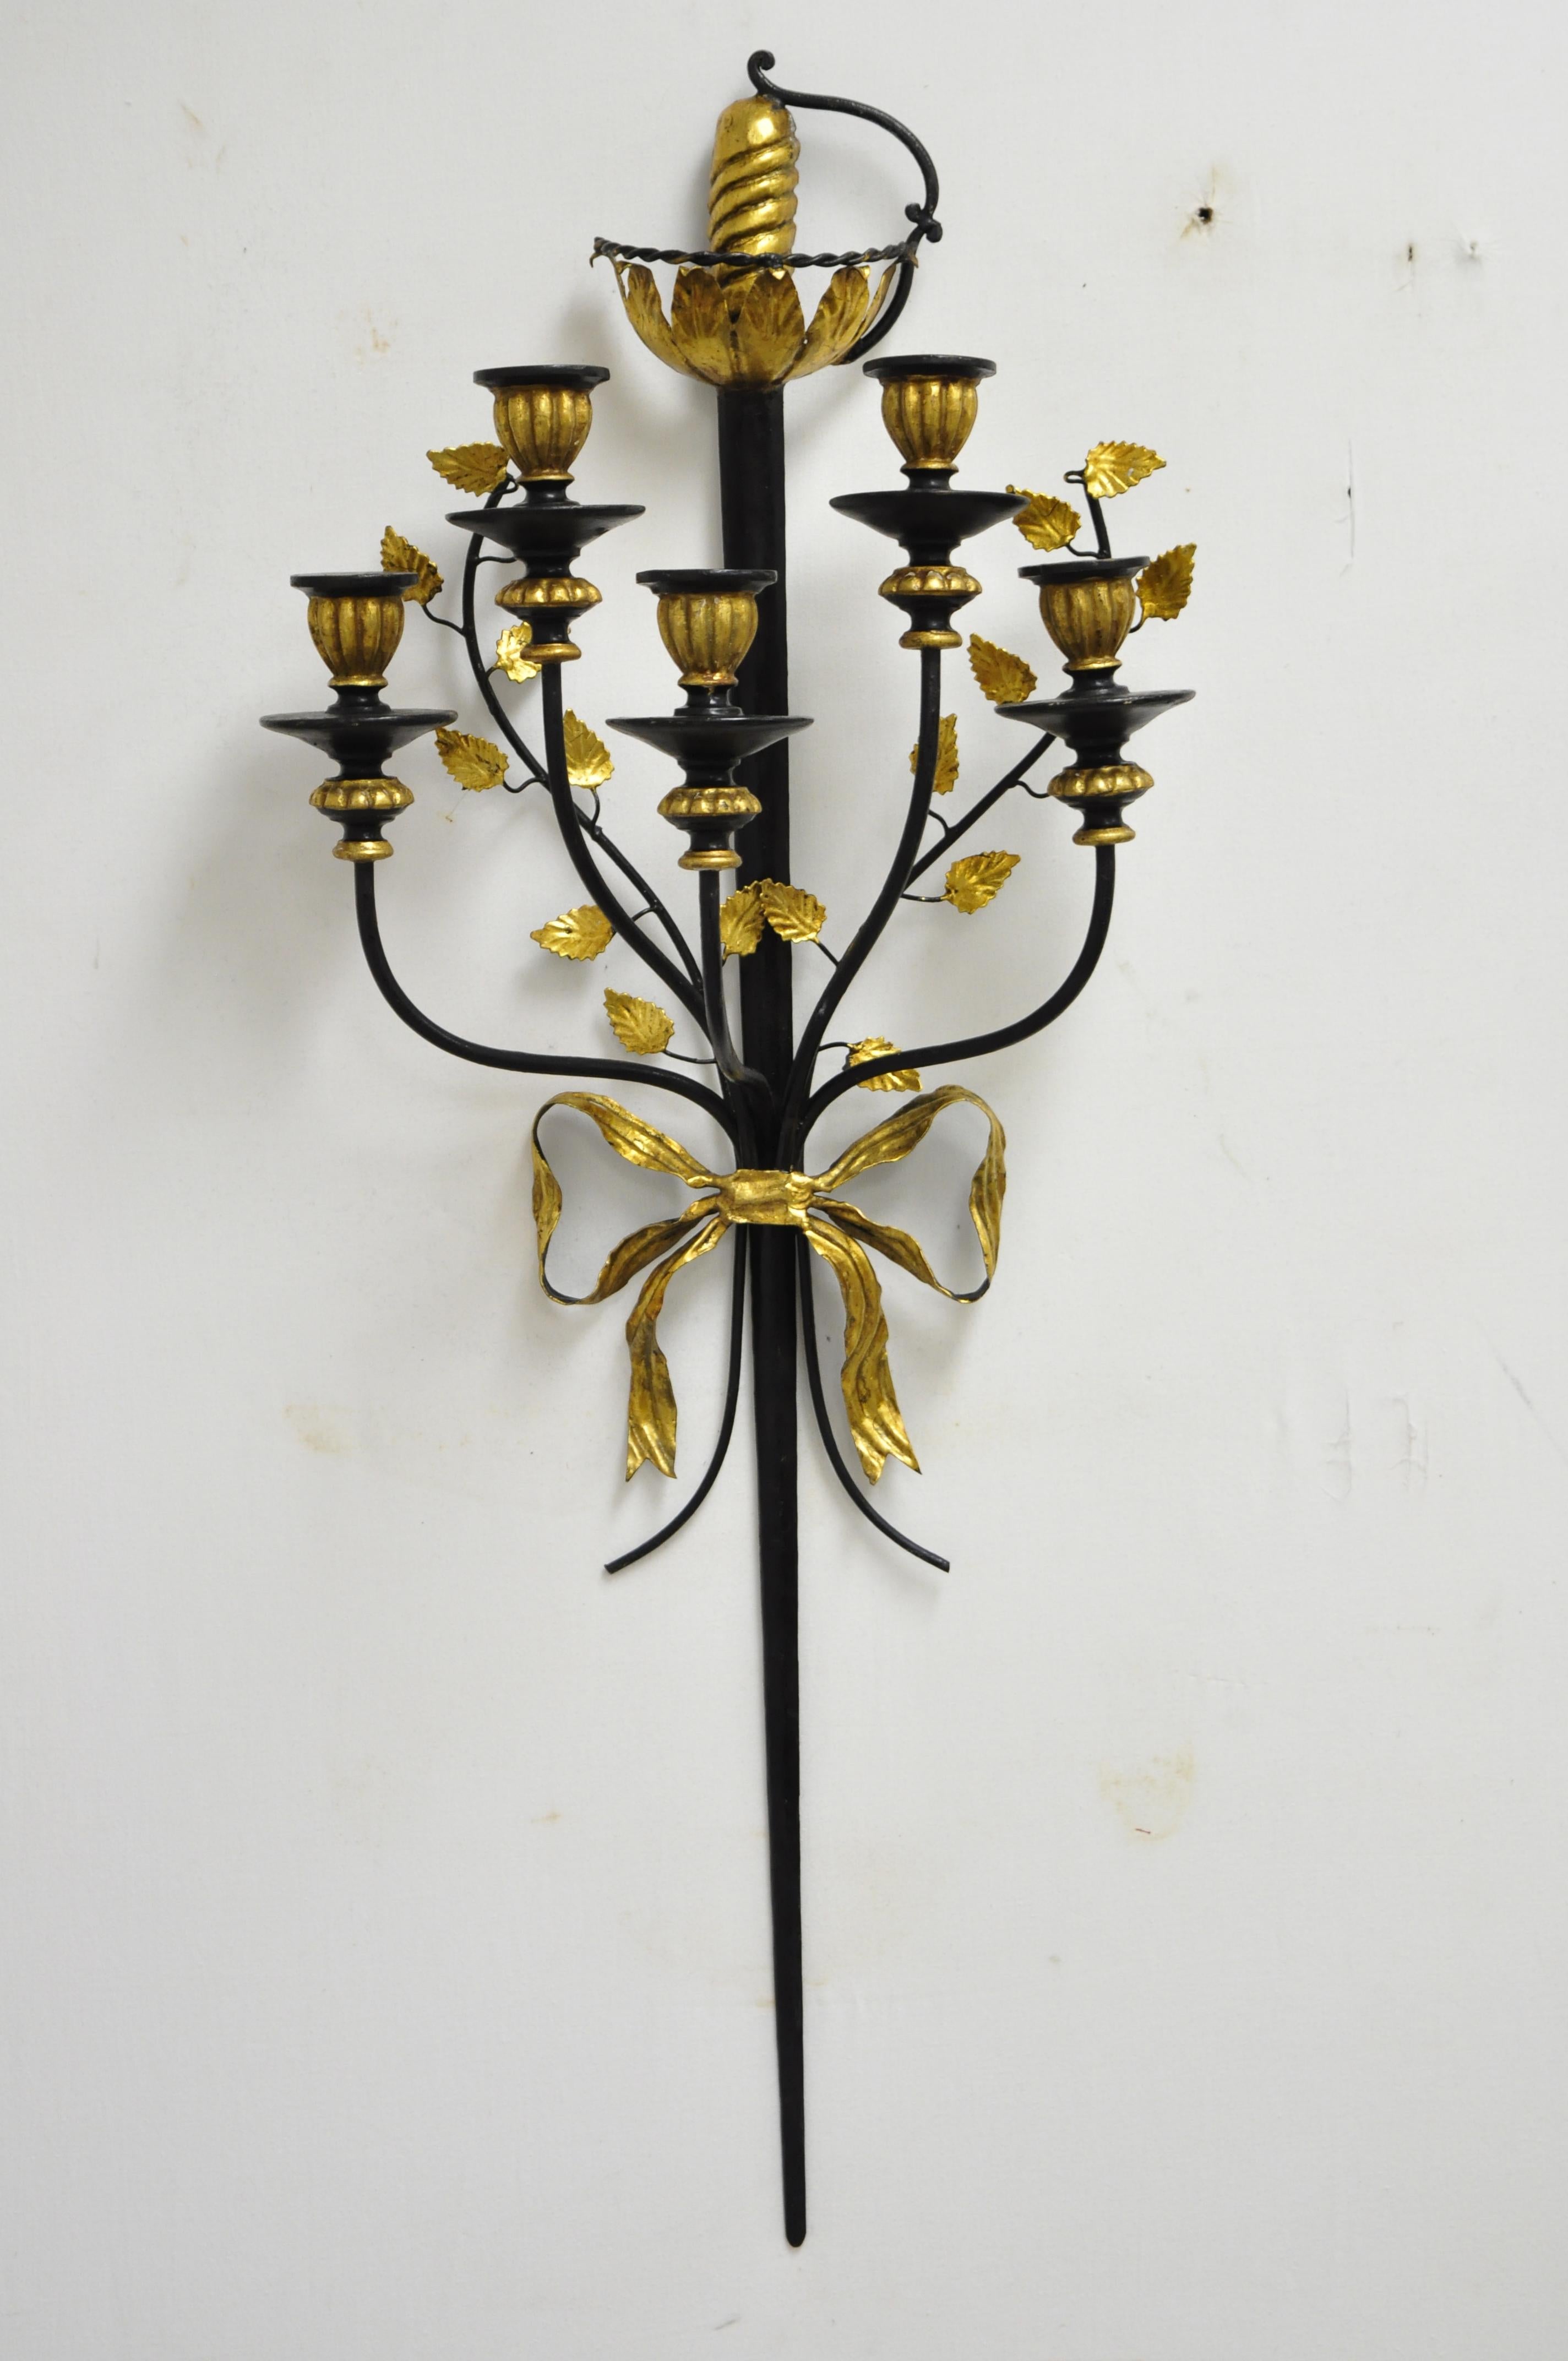 Pair of vintage Italian regency black and gold iron tole sword candle wall sconces. Listing includes long stately sword forms, 5 candleholders, black and gold gilt finish, very nice vintage item, quality Italian craftsmanship, circa mid-20th